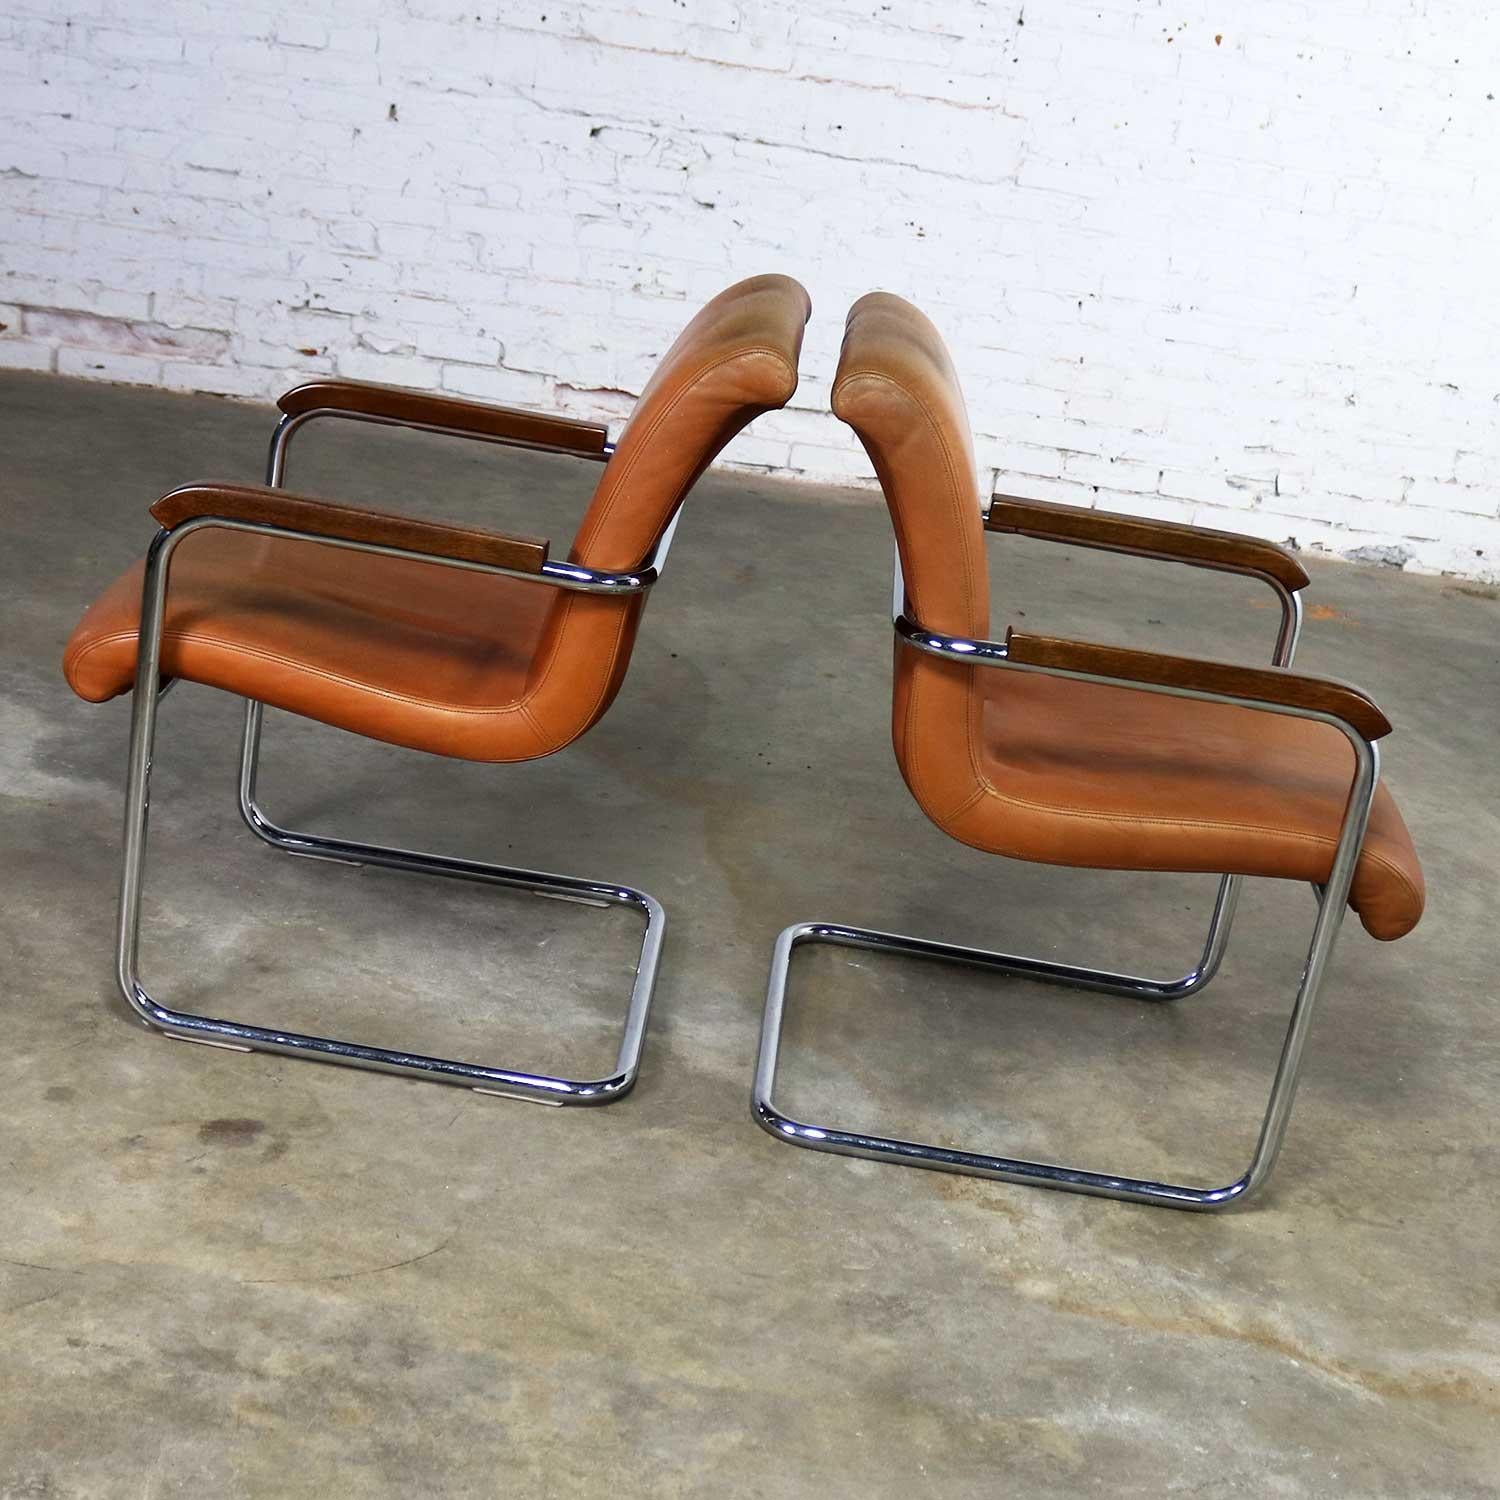 Cantilevered Chrome Cognac Leather Chairs Mid-Century Modern 1